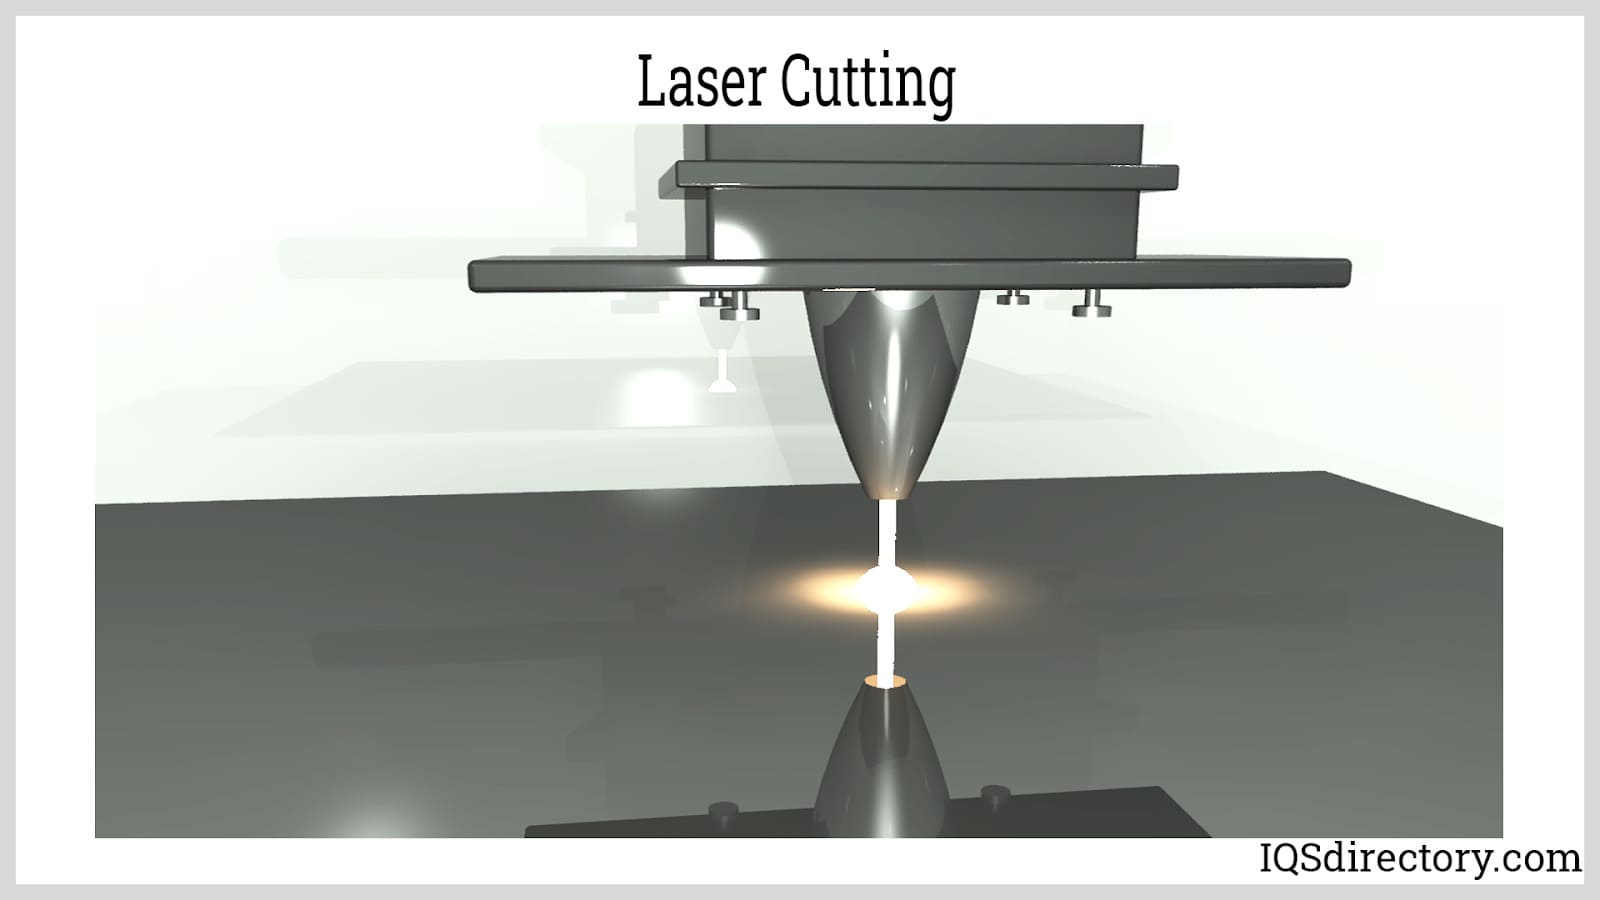 Laser Cutting: What Is It? How Does It Work? Methods